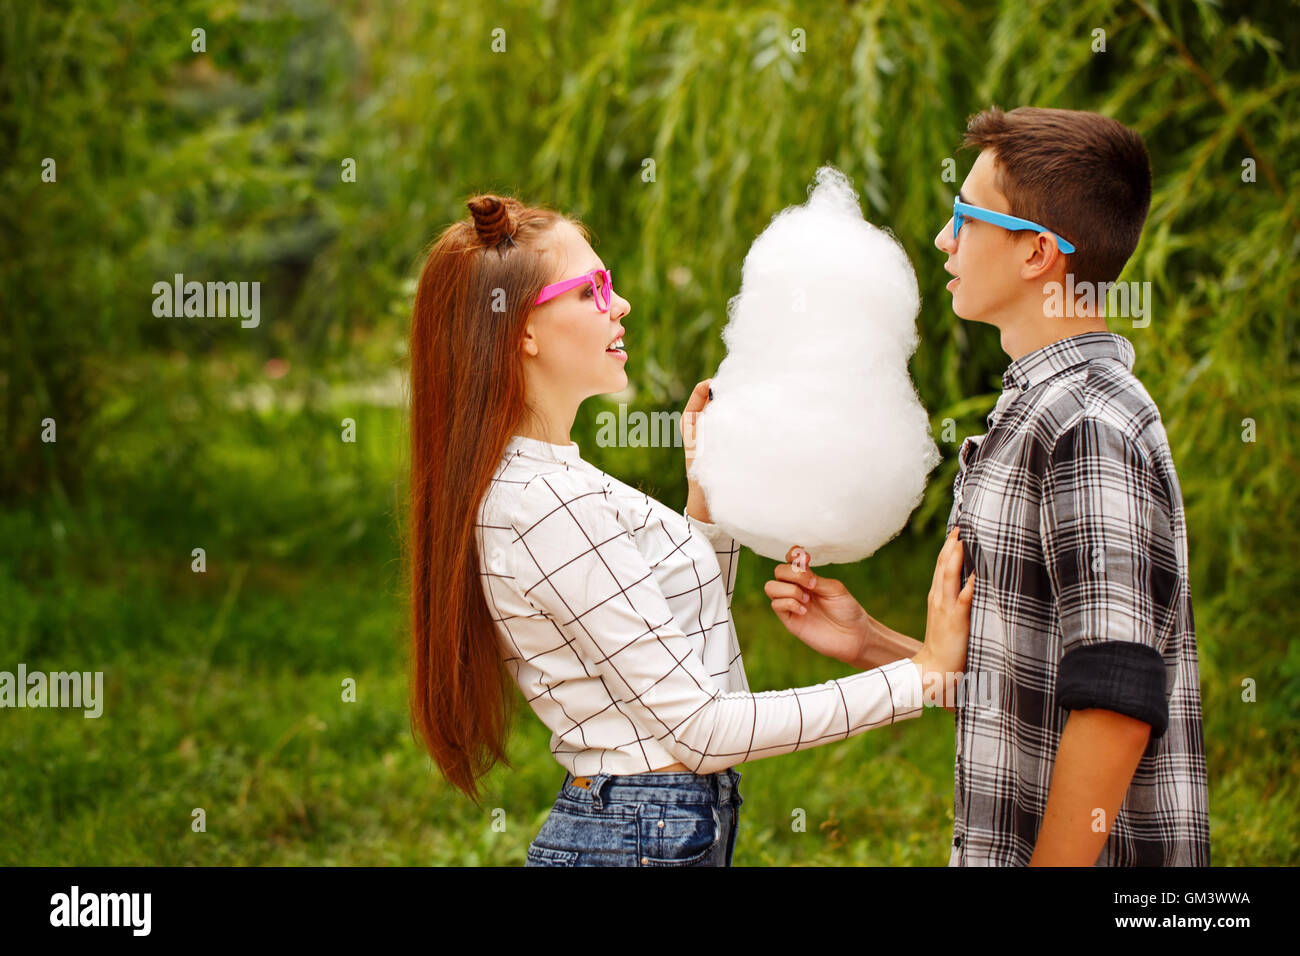 Loving couple teens eat cotton candy. Girlfriend and boyfriend together. They wear glasses. First love. He falls in love. Date. Stock Photo